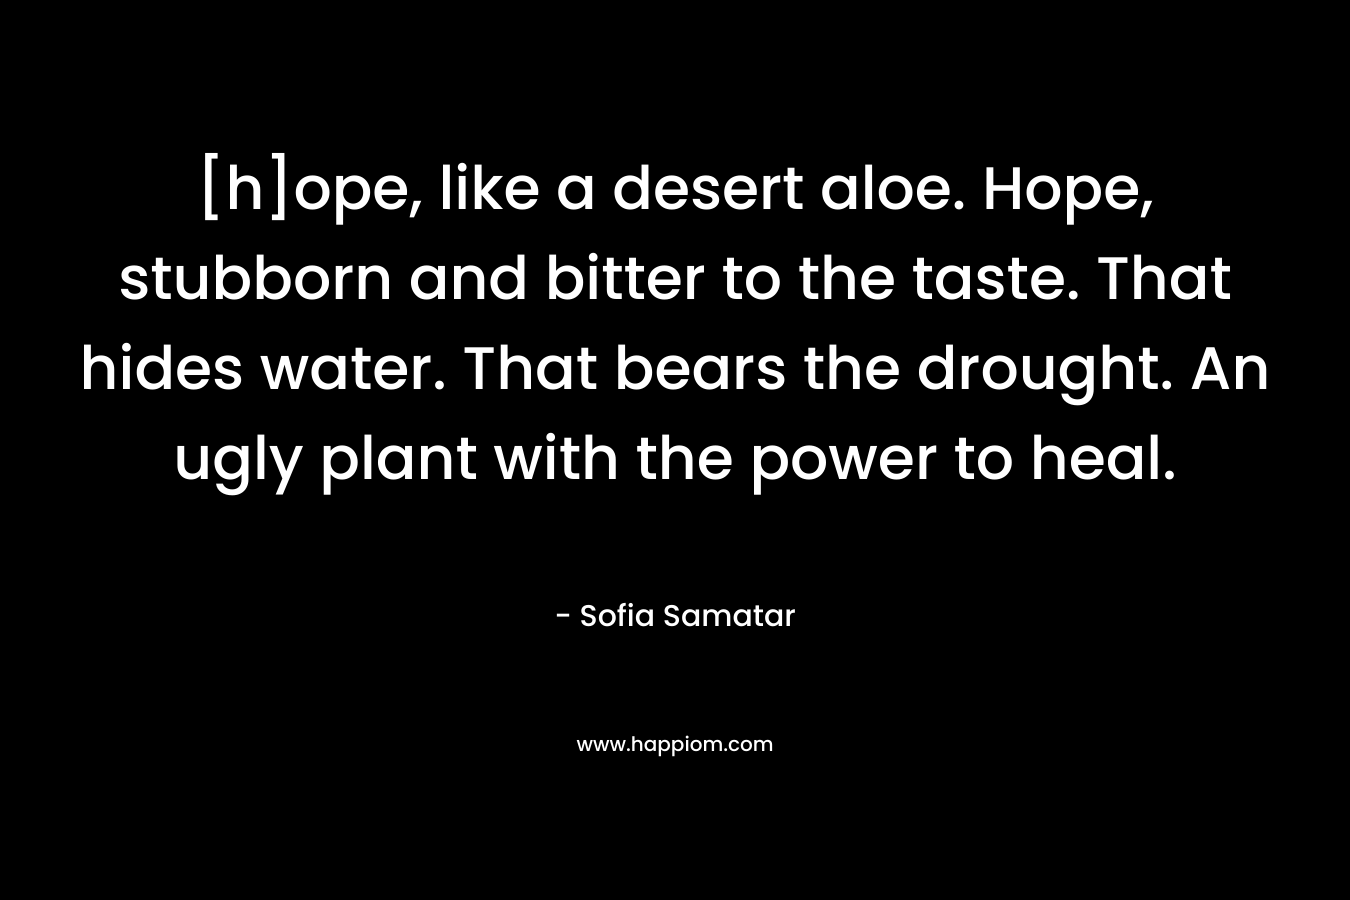 [h]ope, like a desert aloe. Hope, stubborn and bitter to the taste. That hides water. That bears the drought. An ugly plant with the power to heal. – Sofia Samatar